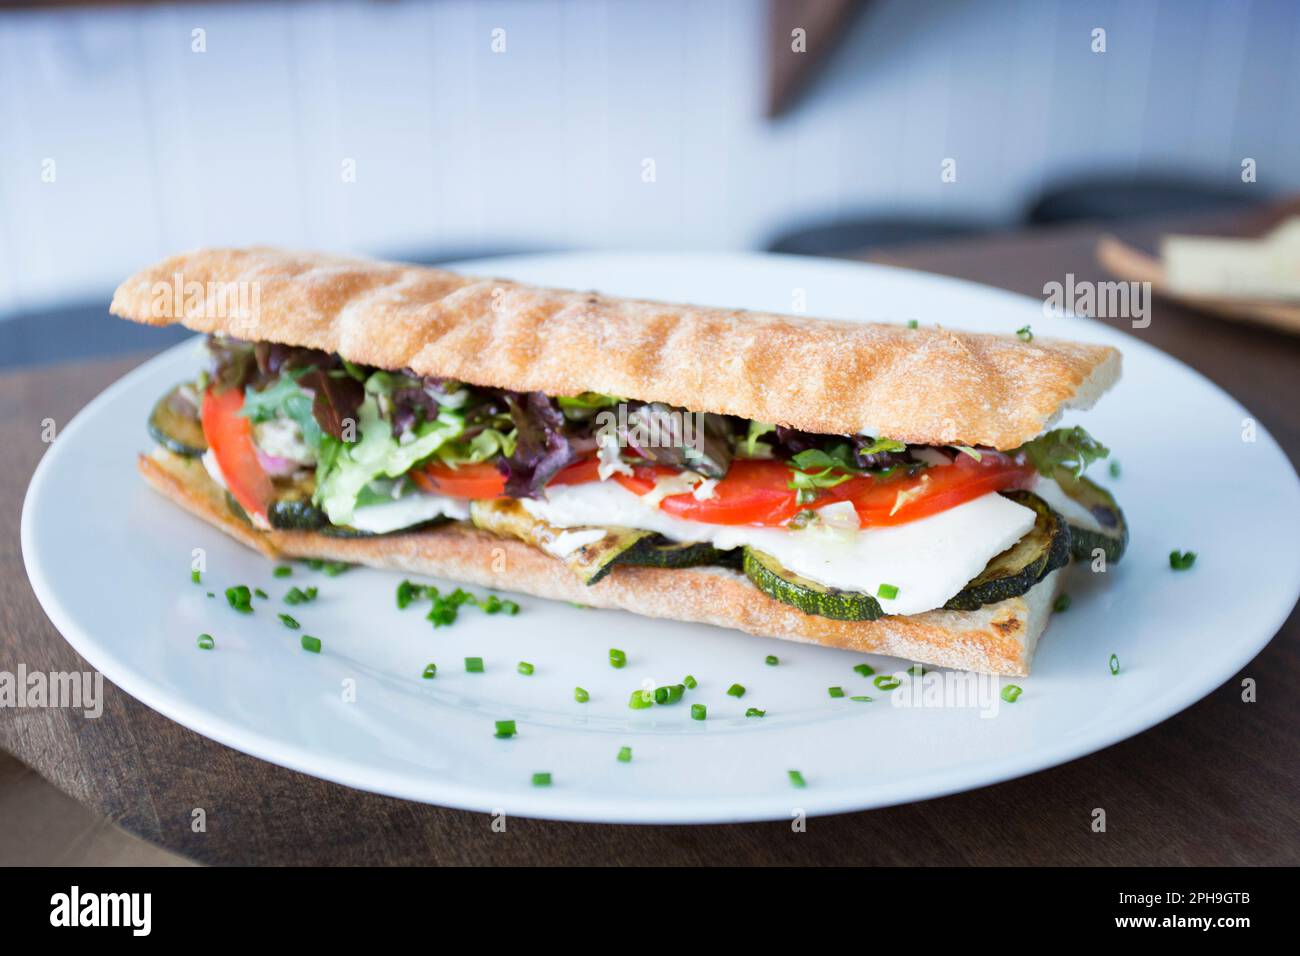 Delicious vegan sandwich with different vegetables. Stock Photo